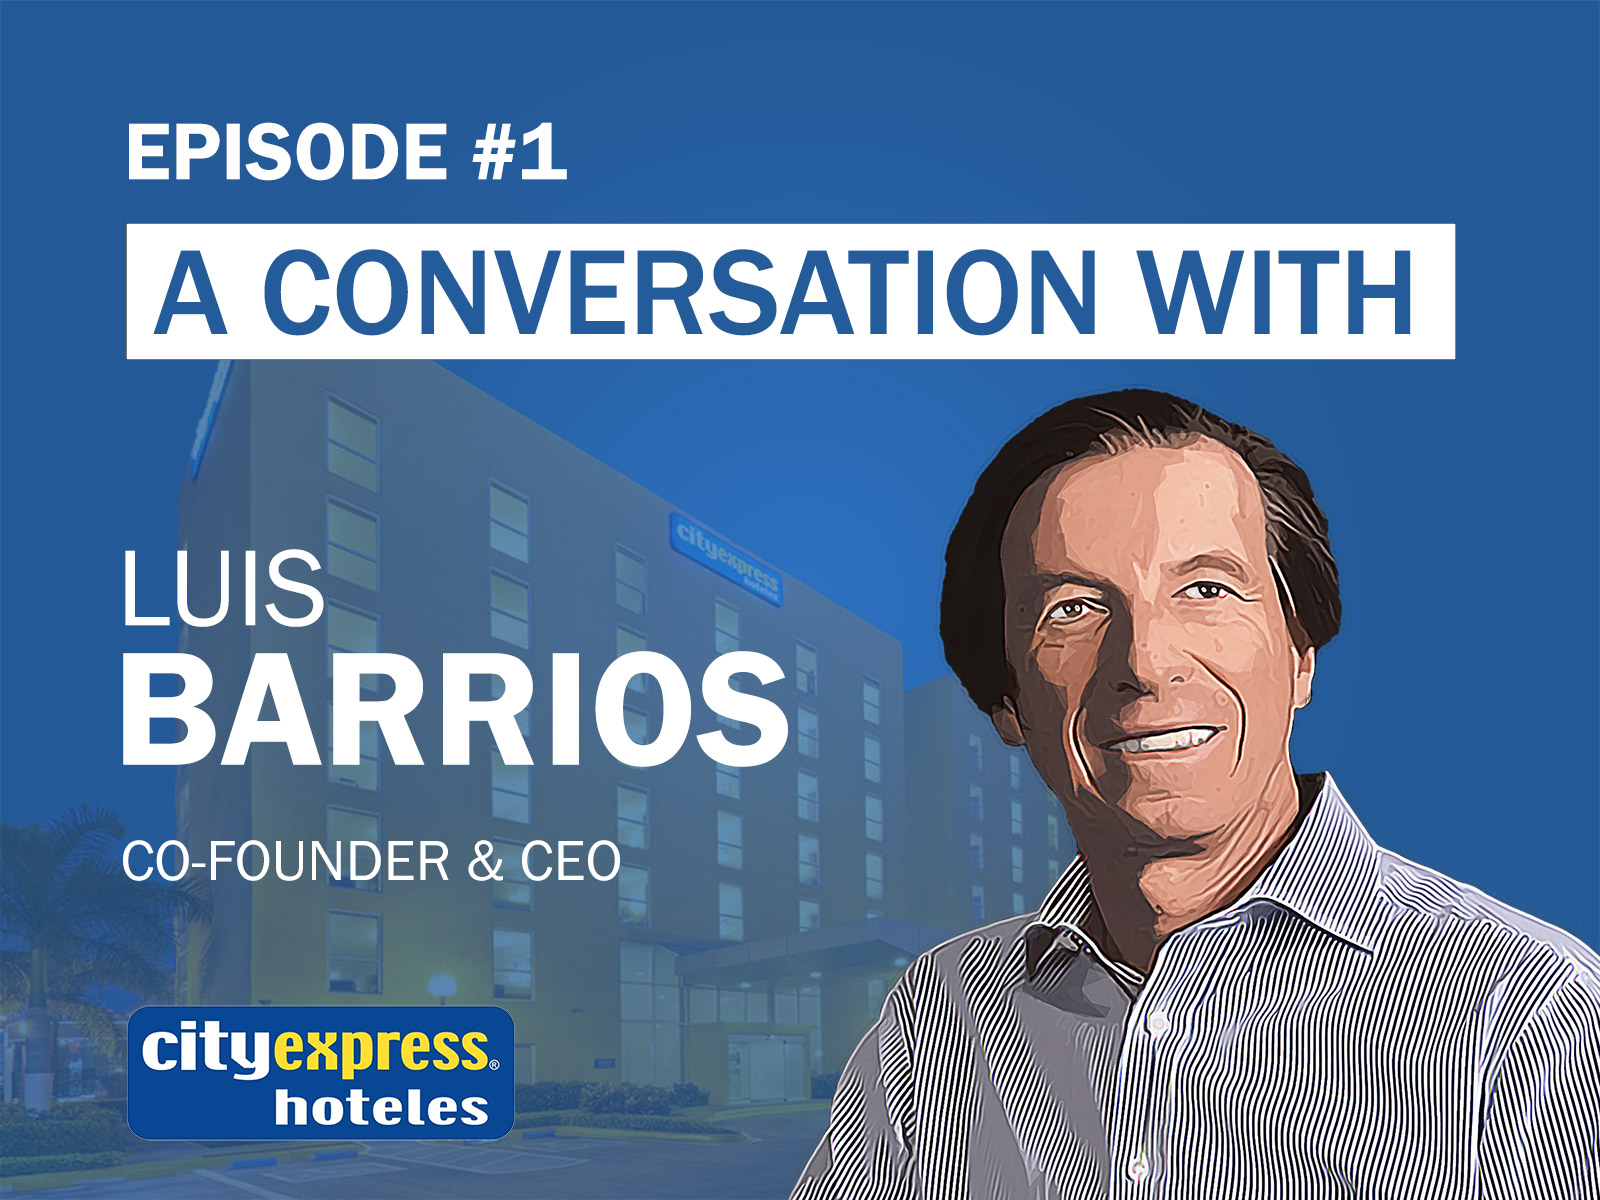 Luis Barrios, the Co-founder, Chairman, and CEO of Hoteles City Express, the leading Mexican limited-service hotel chain, explains how he developed the concept and is surviving COVID-19, grew from one hotel to 153 by solely focusing on the customer and his plans to monetize the group’s large real estate portfolio and go asset-light.